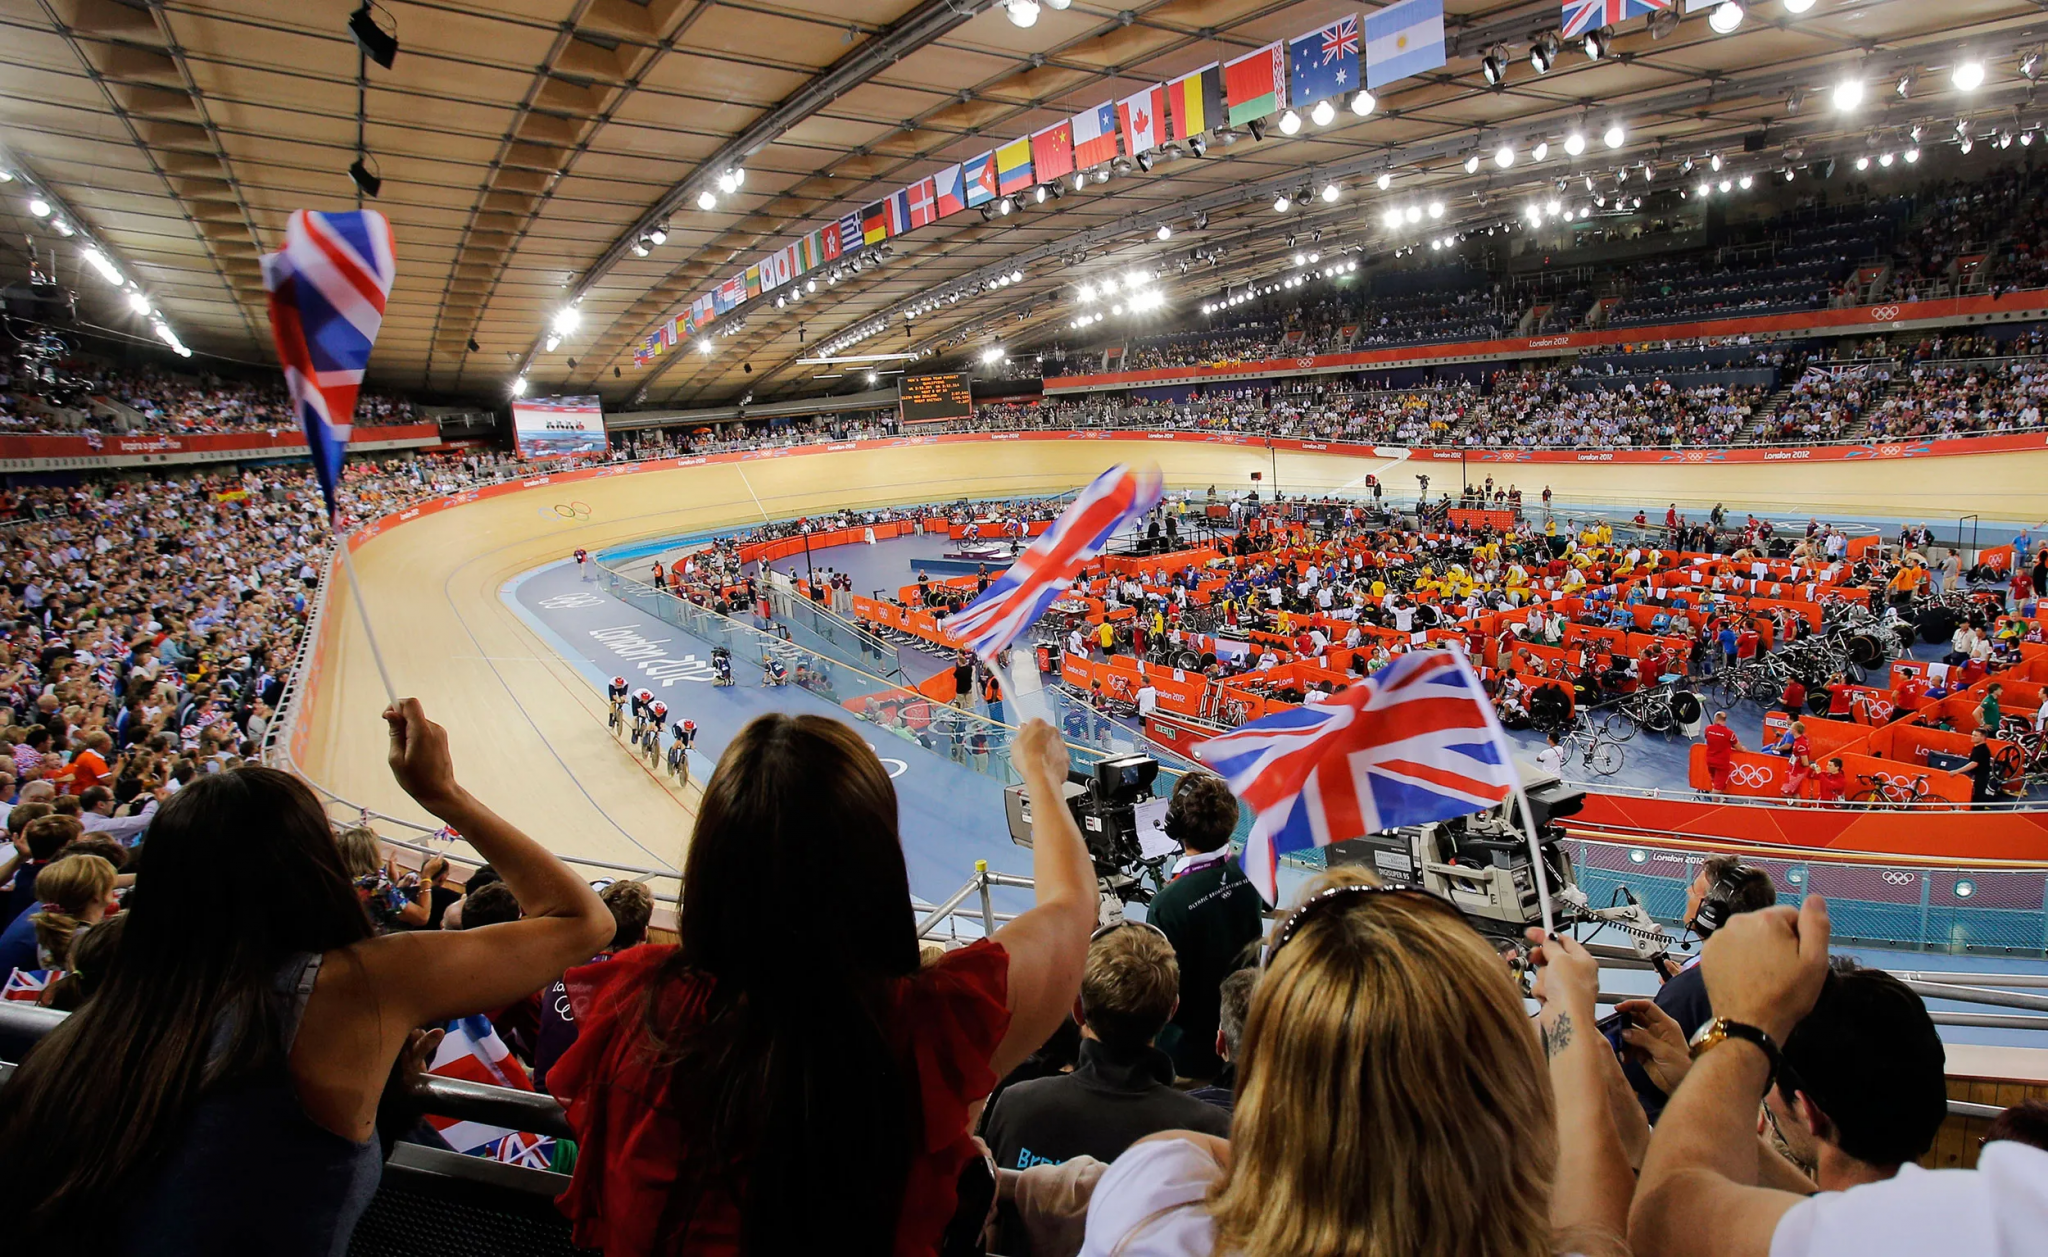 The 250-metres track in the Velodrome for the 2012 Olympics in London was made with 56 kilometres of Siberian Pine and 350,000 nails ©Getty Images